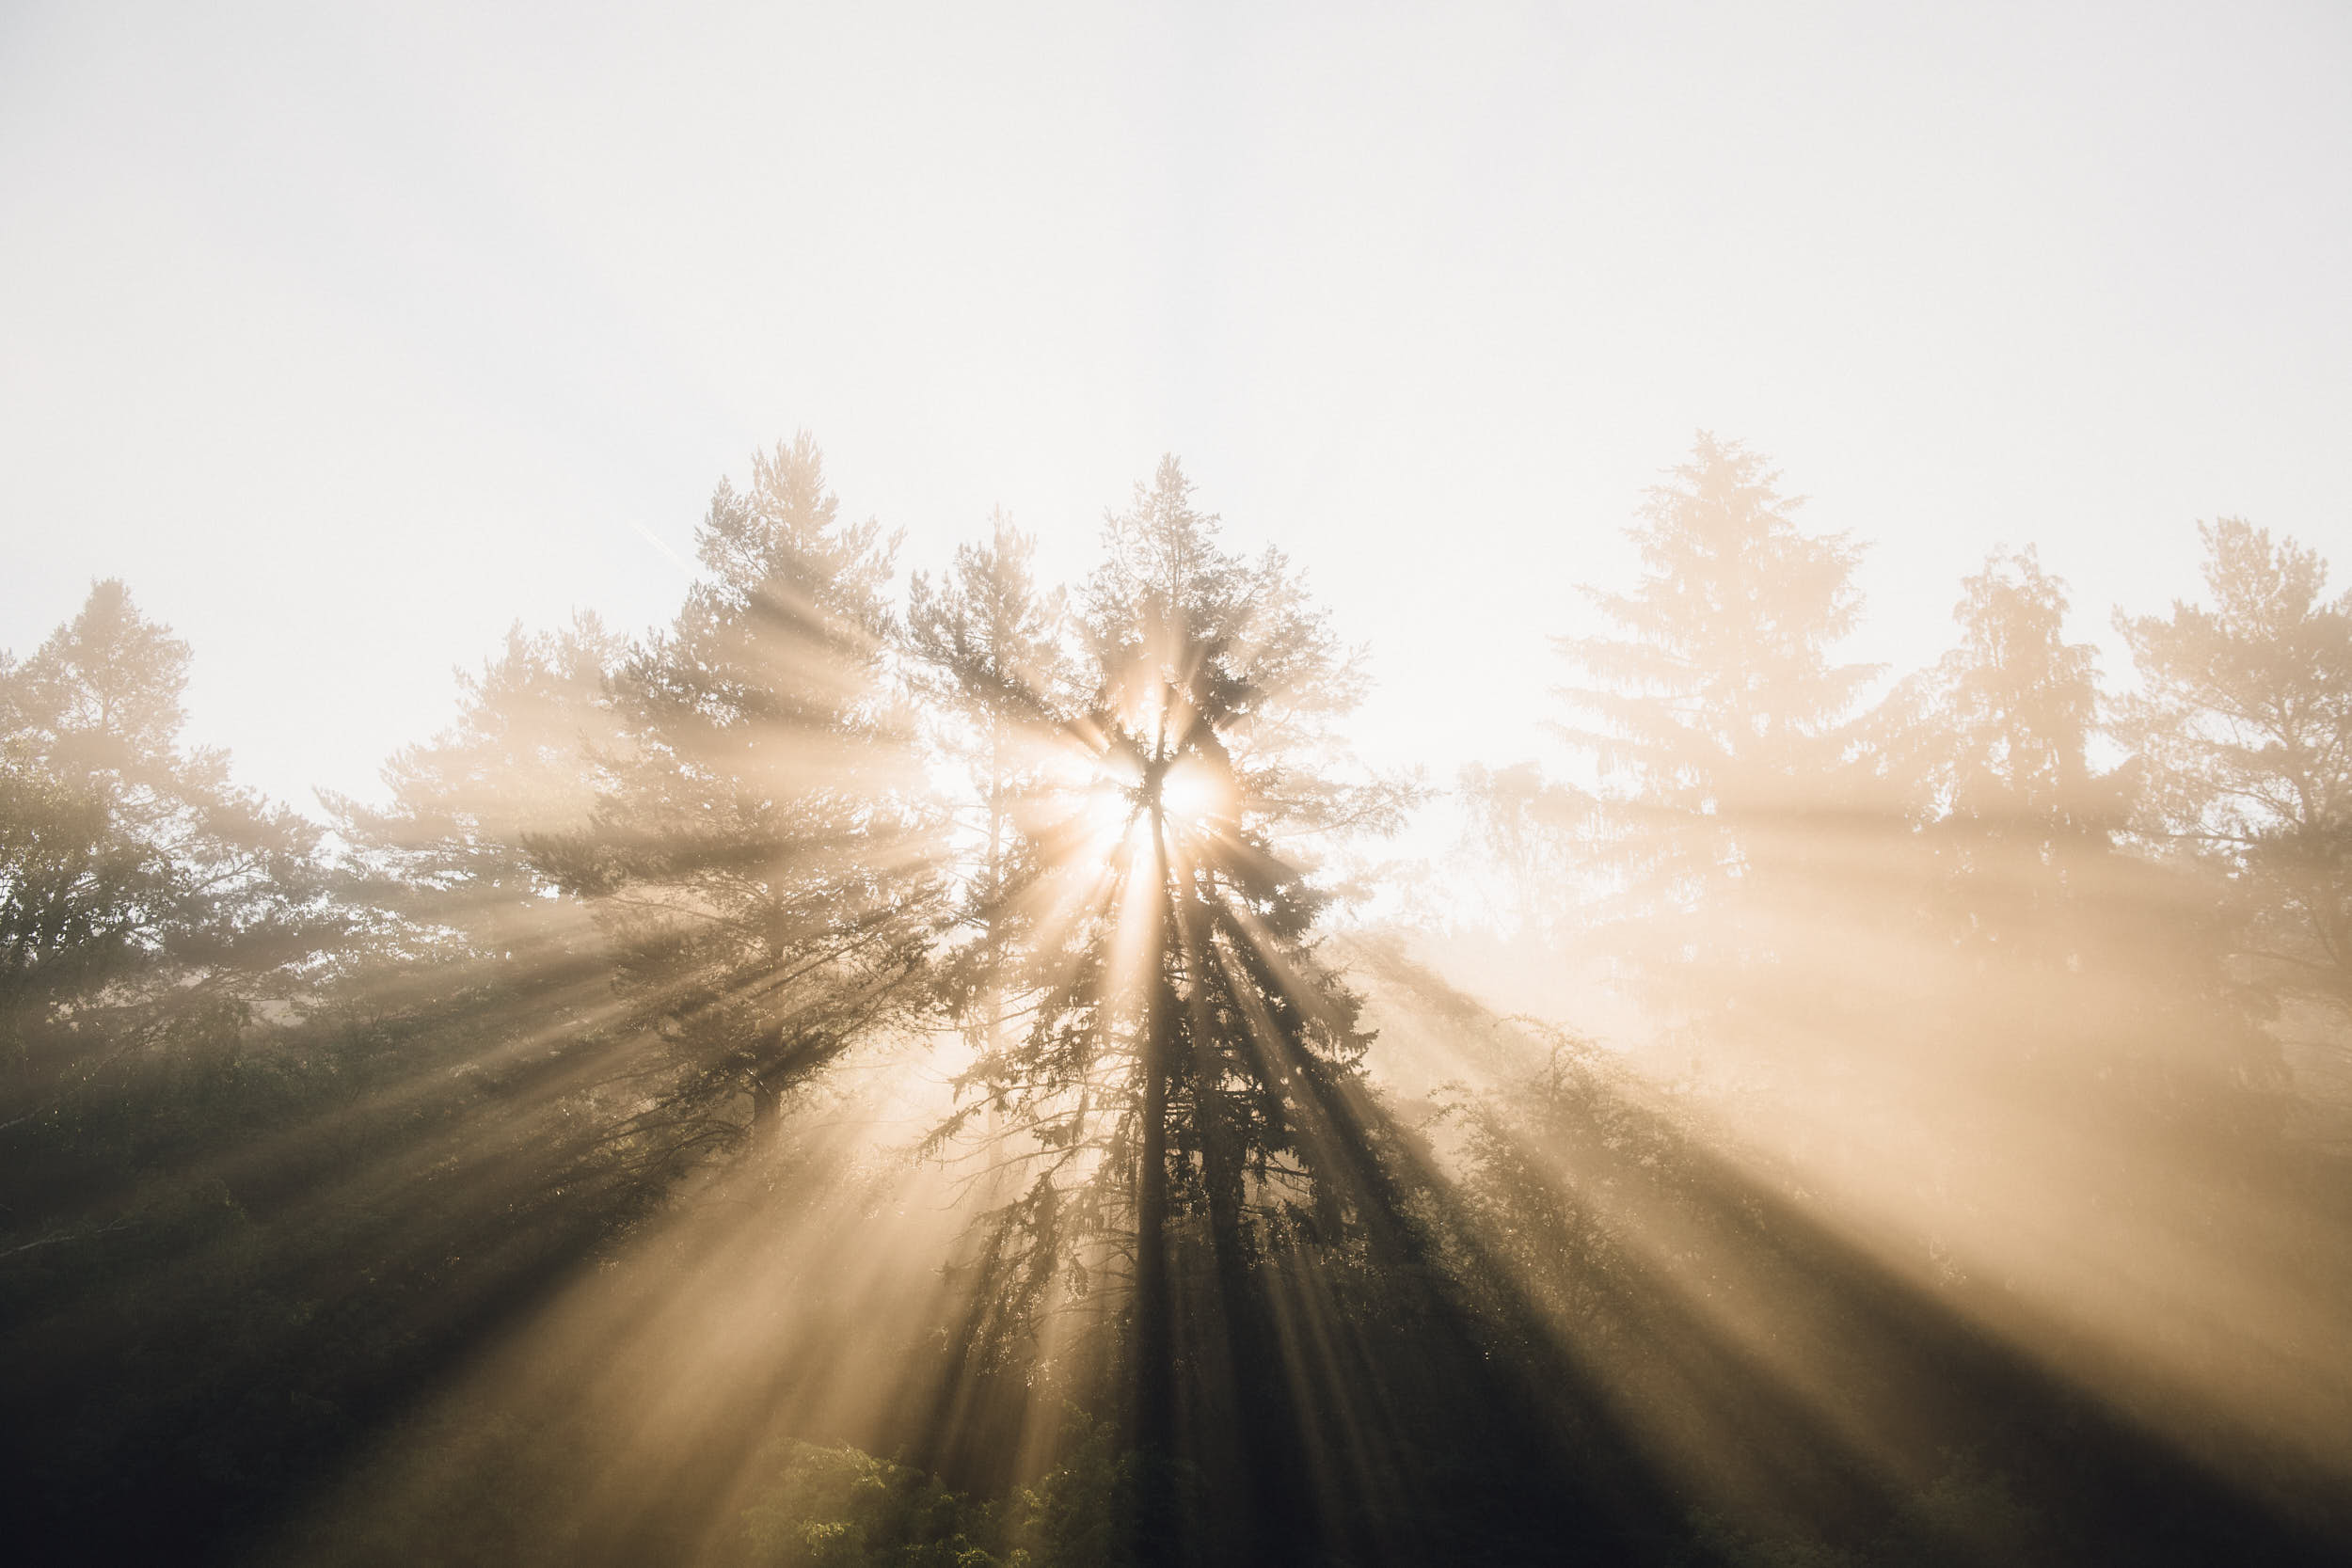 Sun light rays shining through trees in fog with dreamy atmosphere.